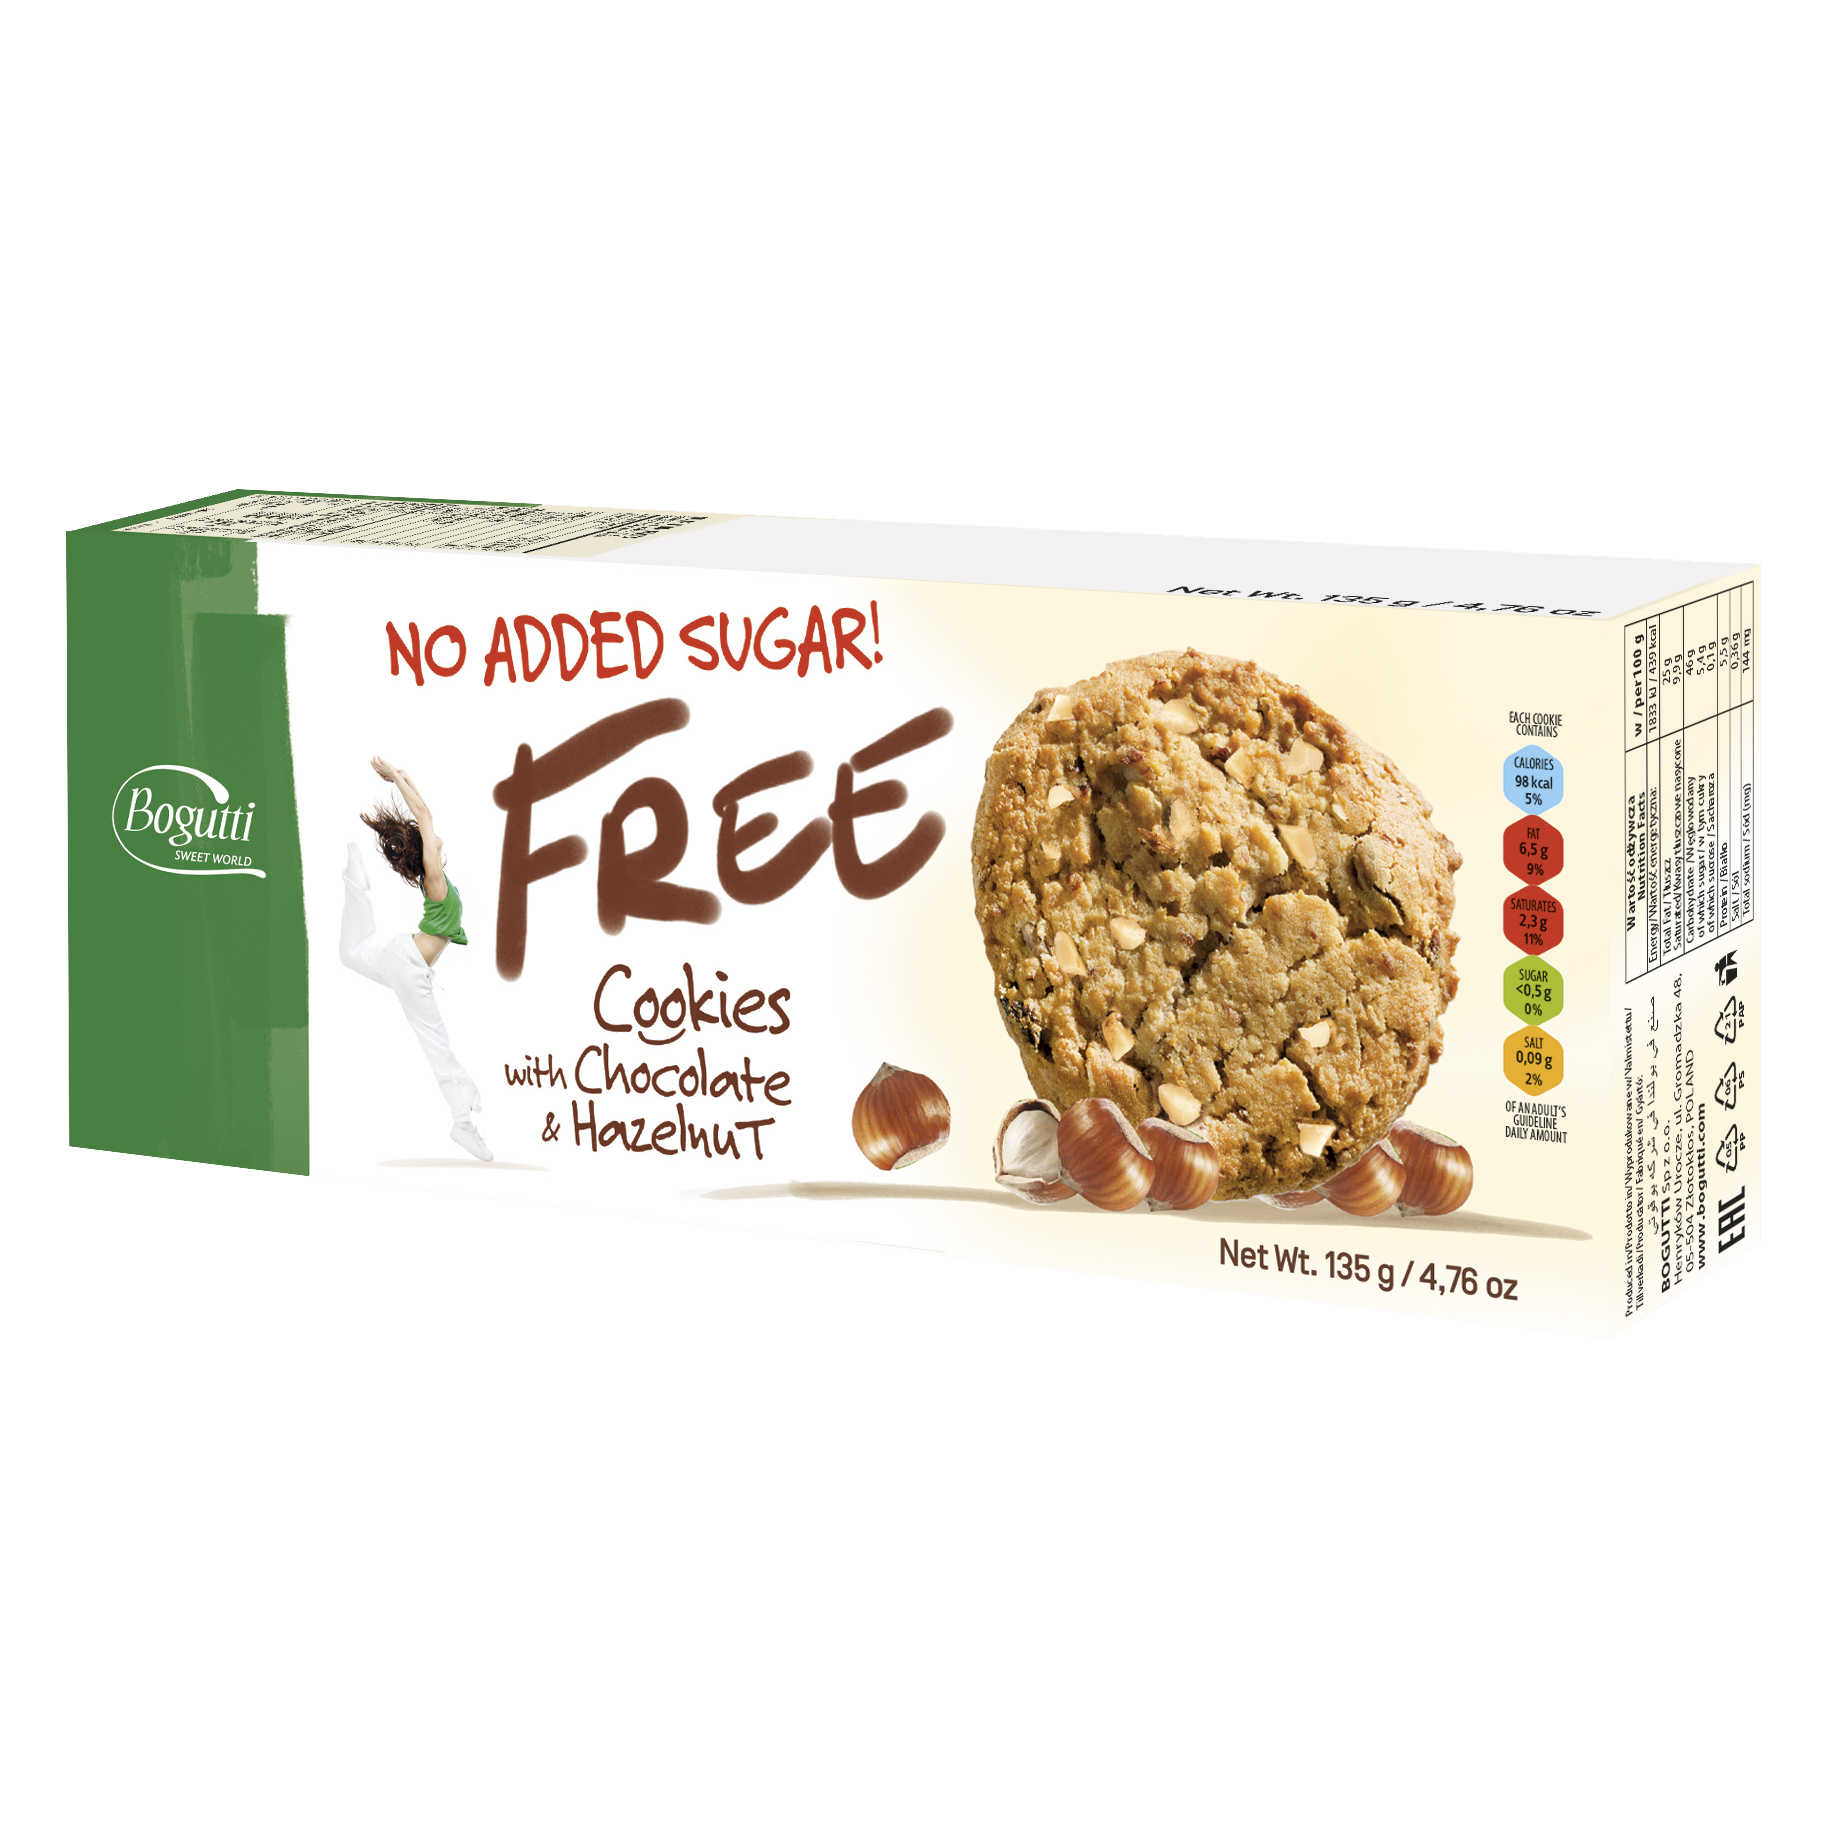 FREE – NO ADDED SUGAR Cookies with chocolate and hazelnuts